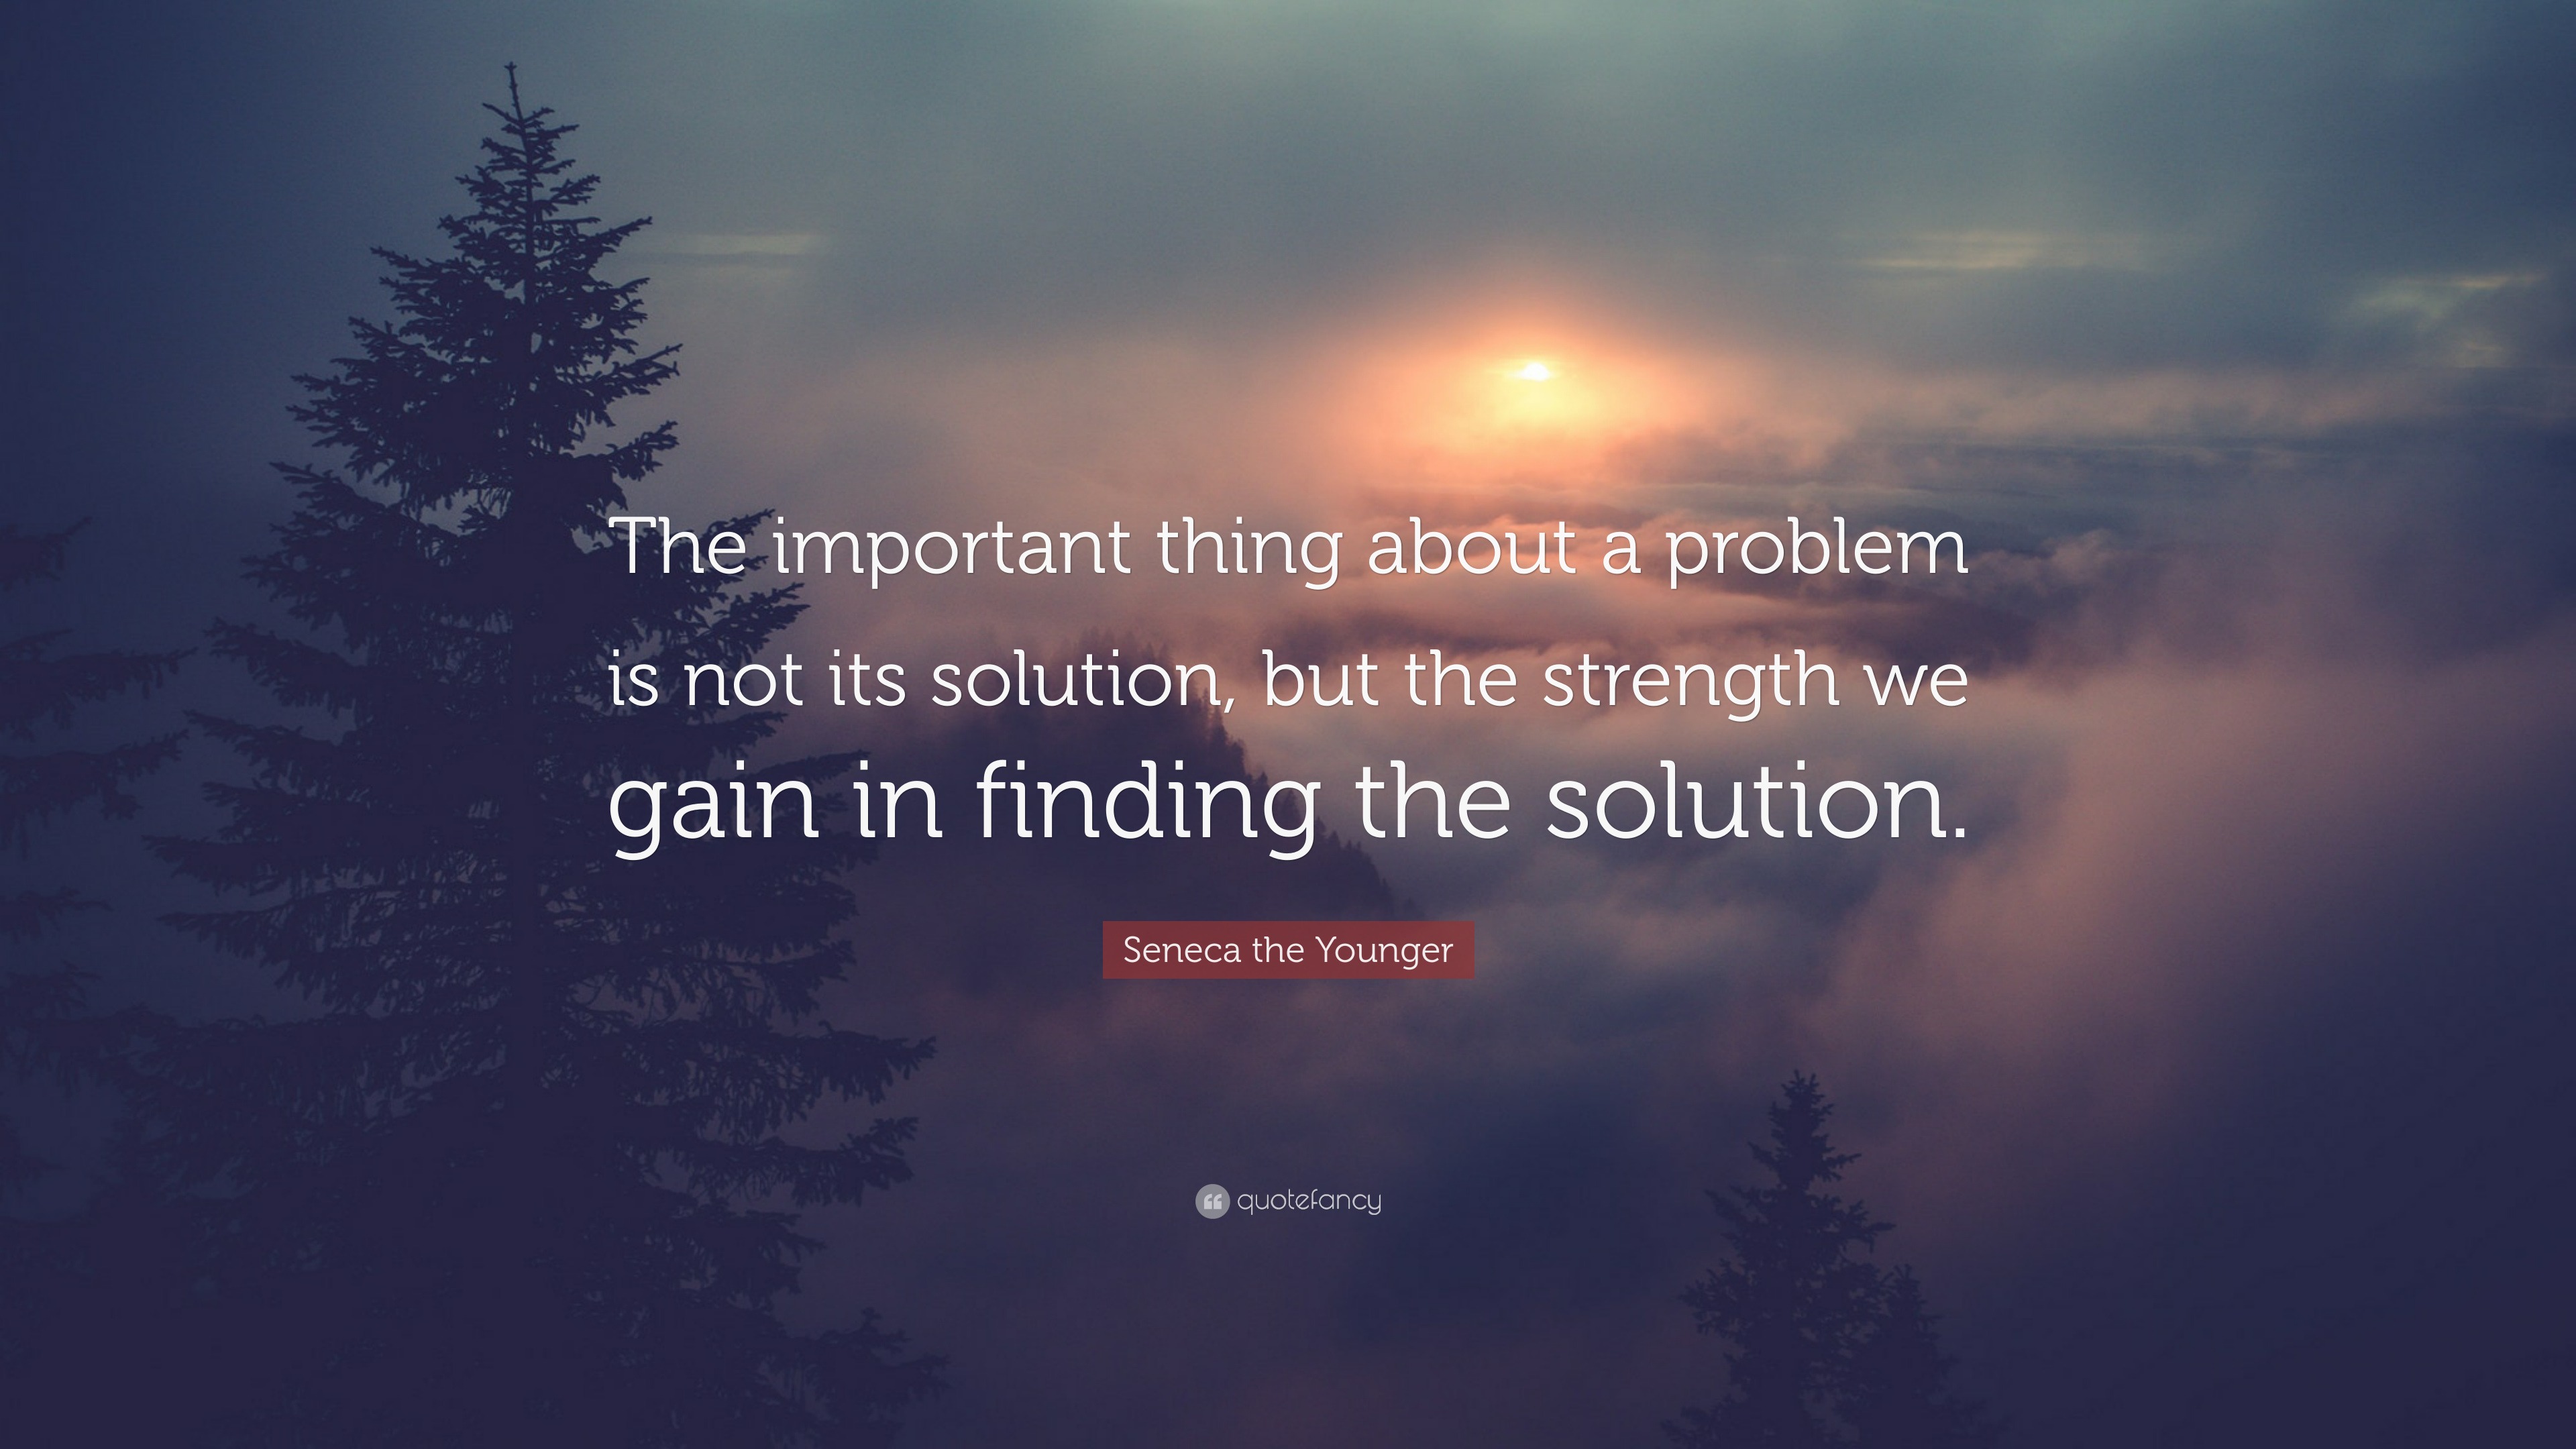 Seneca the Younger Quote: “The important thing about a problem is not ...